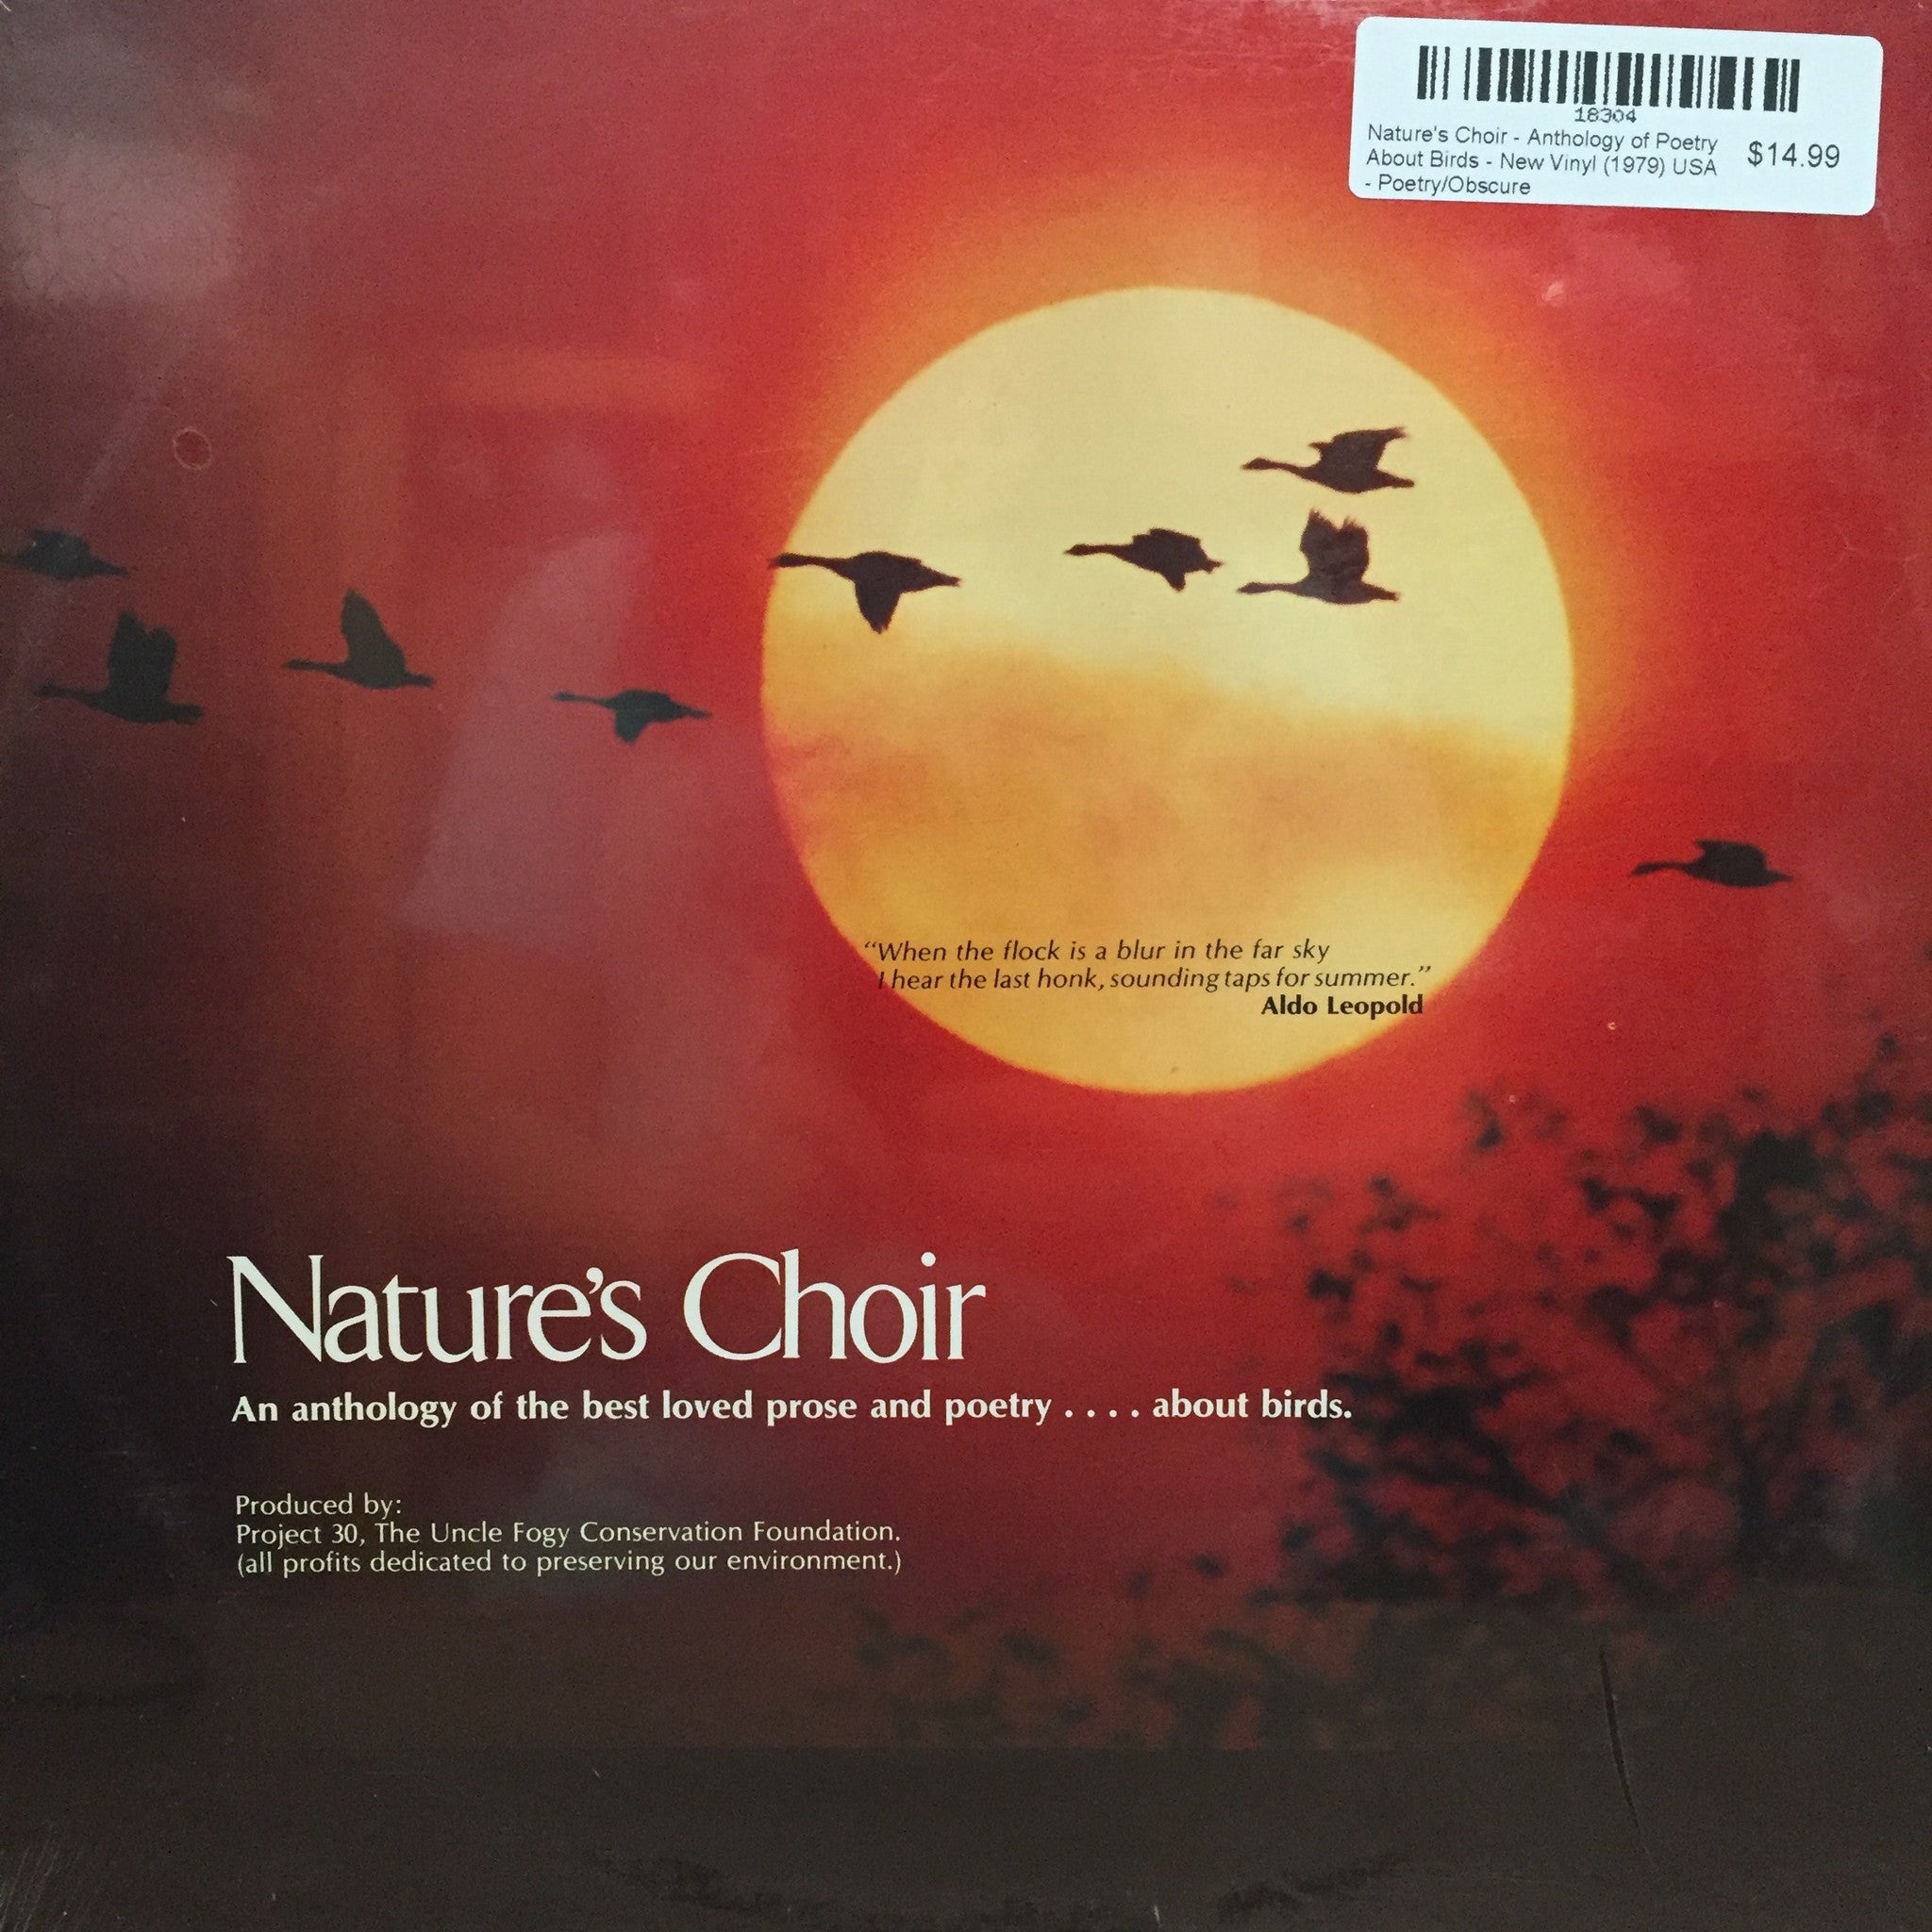 Nature's Choir - Anthology of Poetry About Birds - New Vinyl (1979) USA - Poetry/Obscure